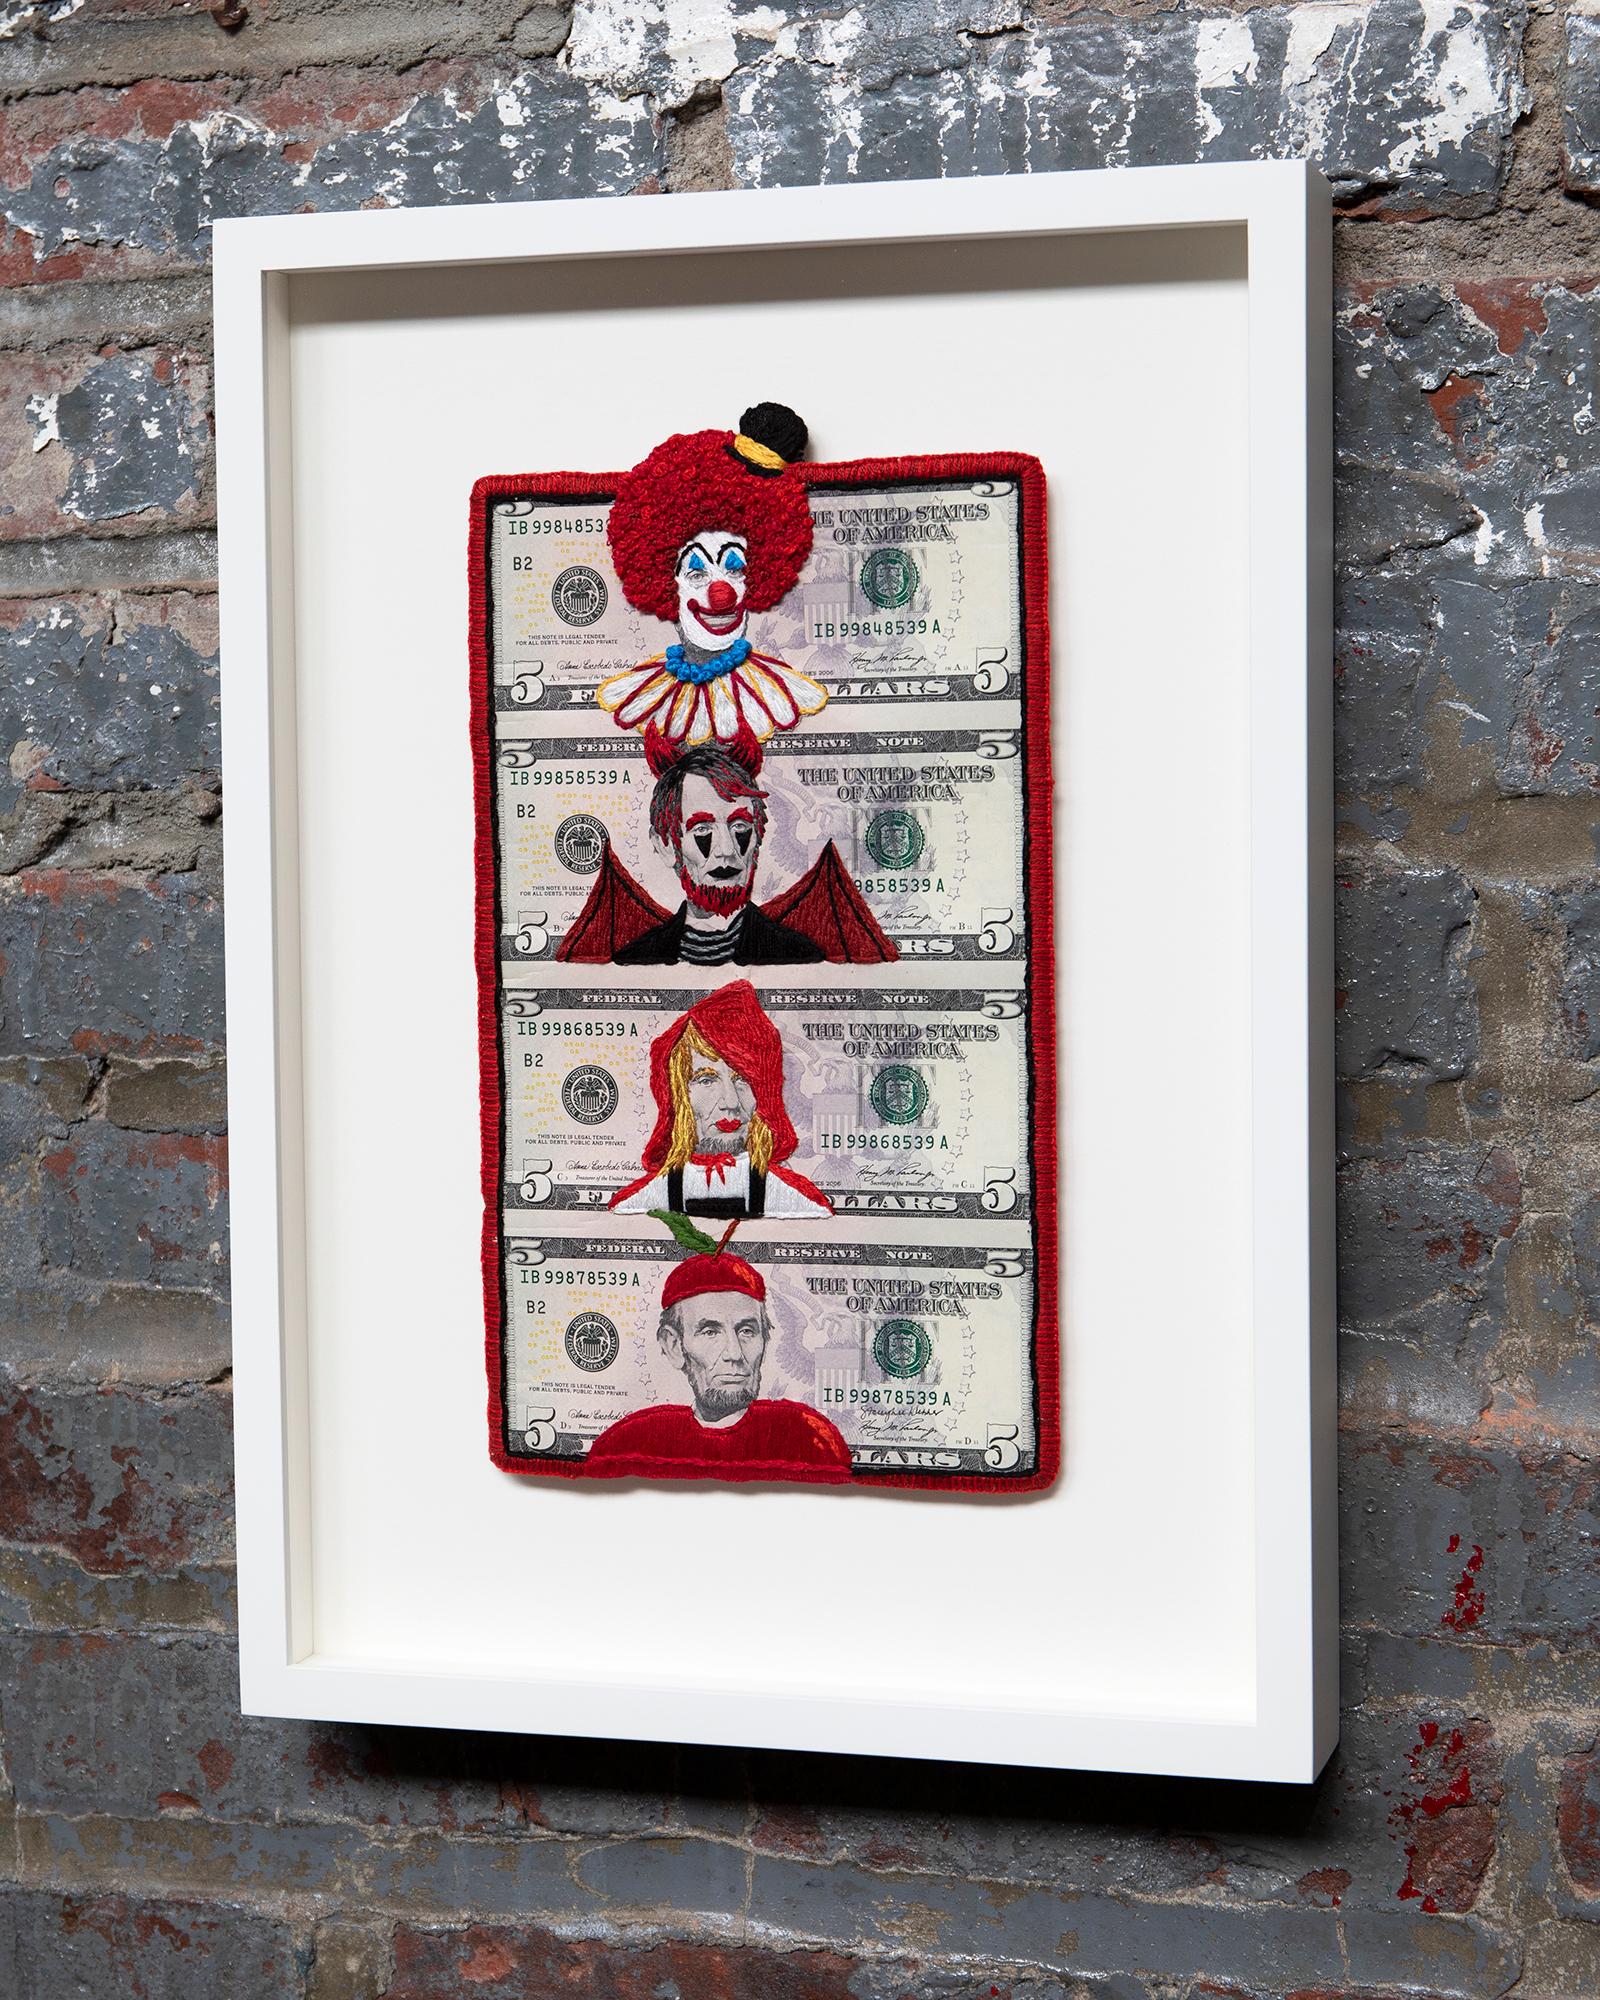 Stacey Lee Webber

Rainbow Costumes: Red Lincoln

15.75” x 11.5” 

hand stitched cotton thread, uncut 1x4 US five dollar bills, framed, glass face

2022